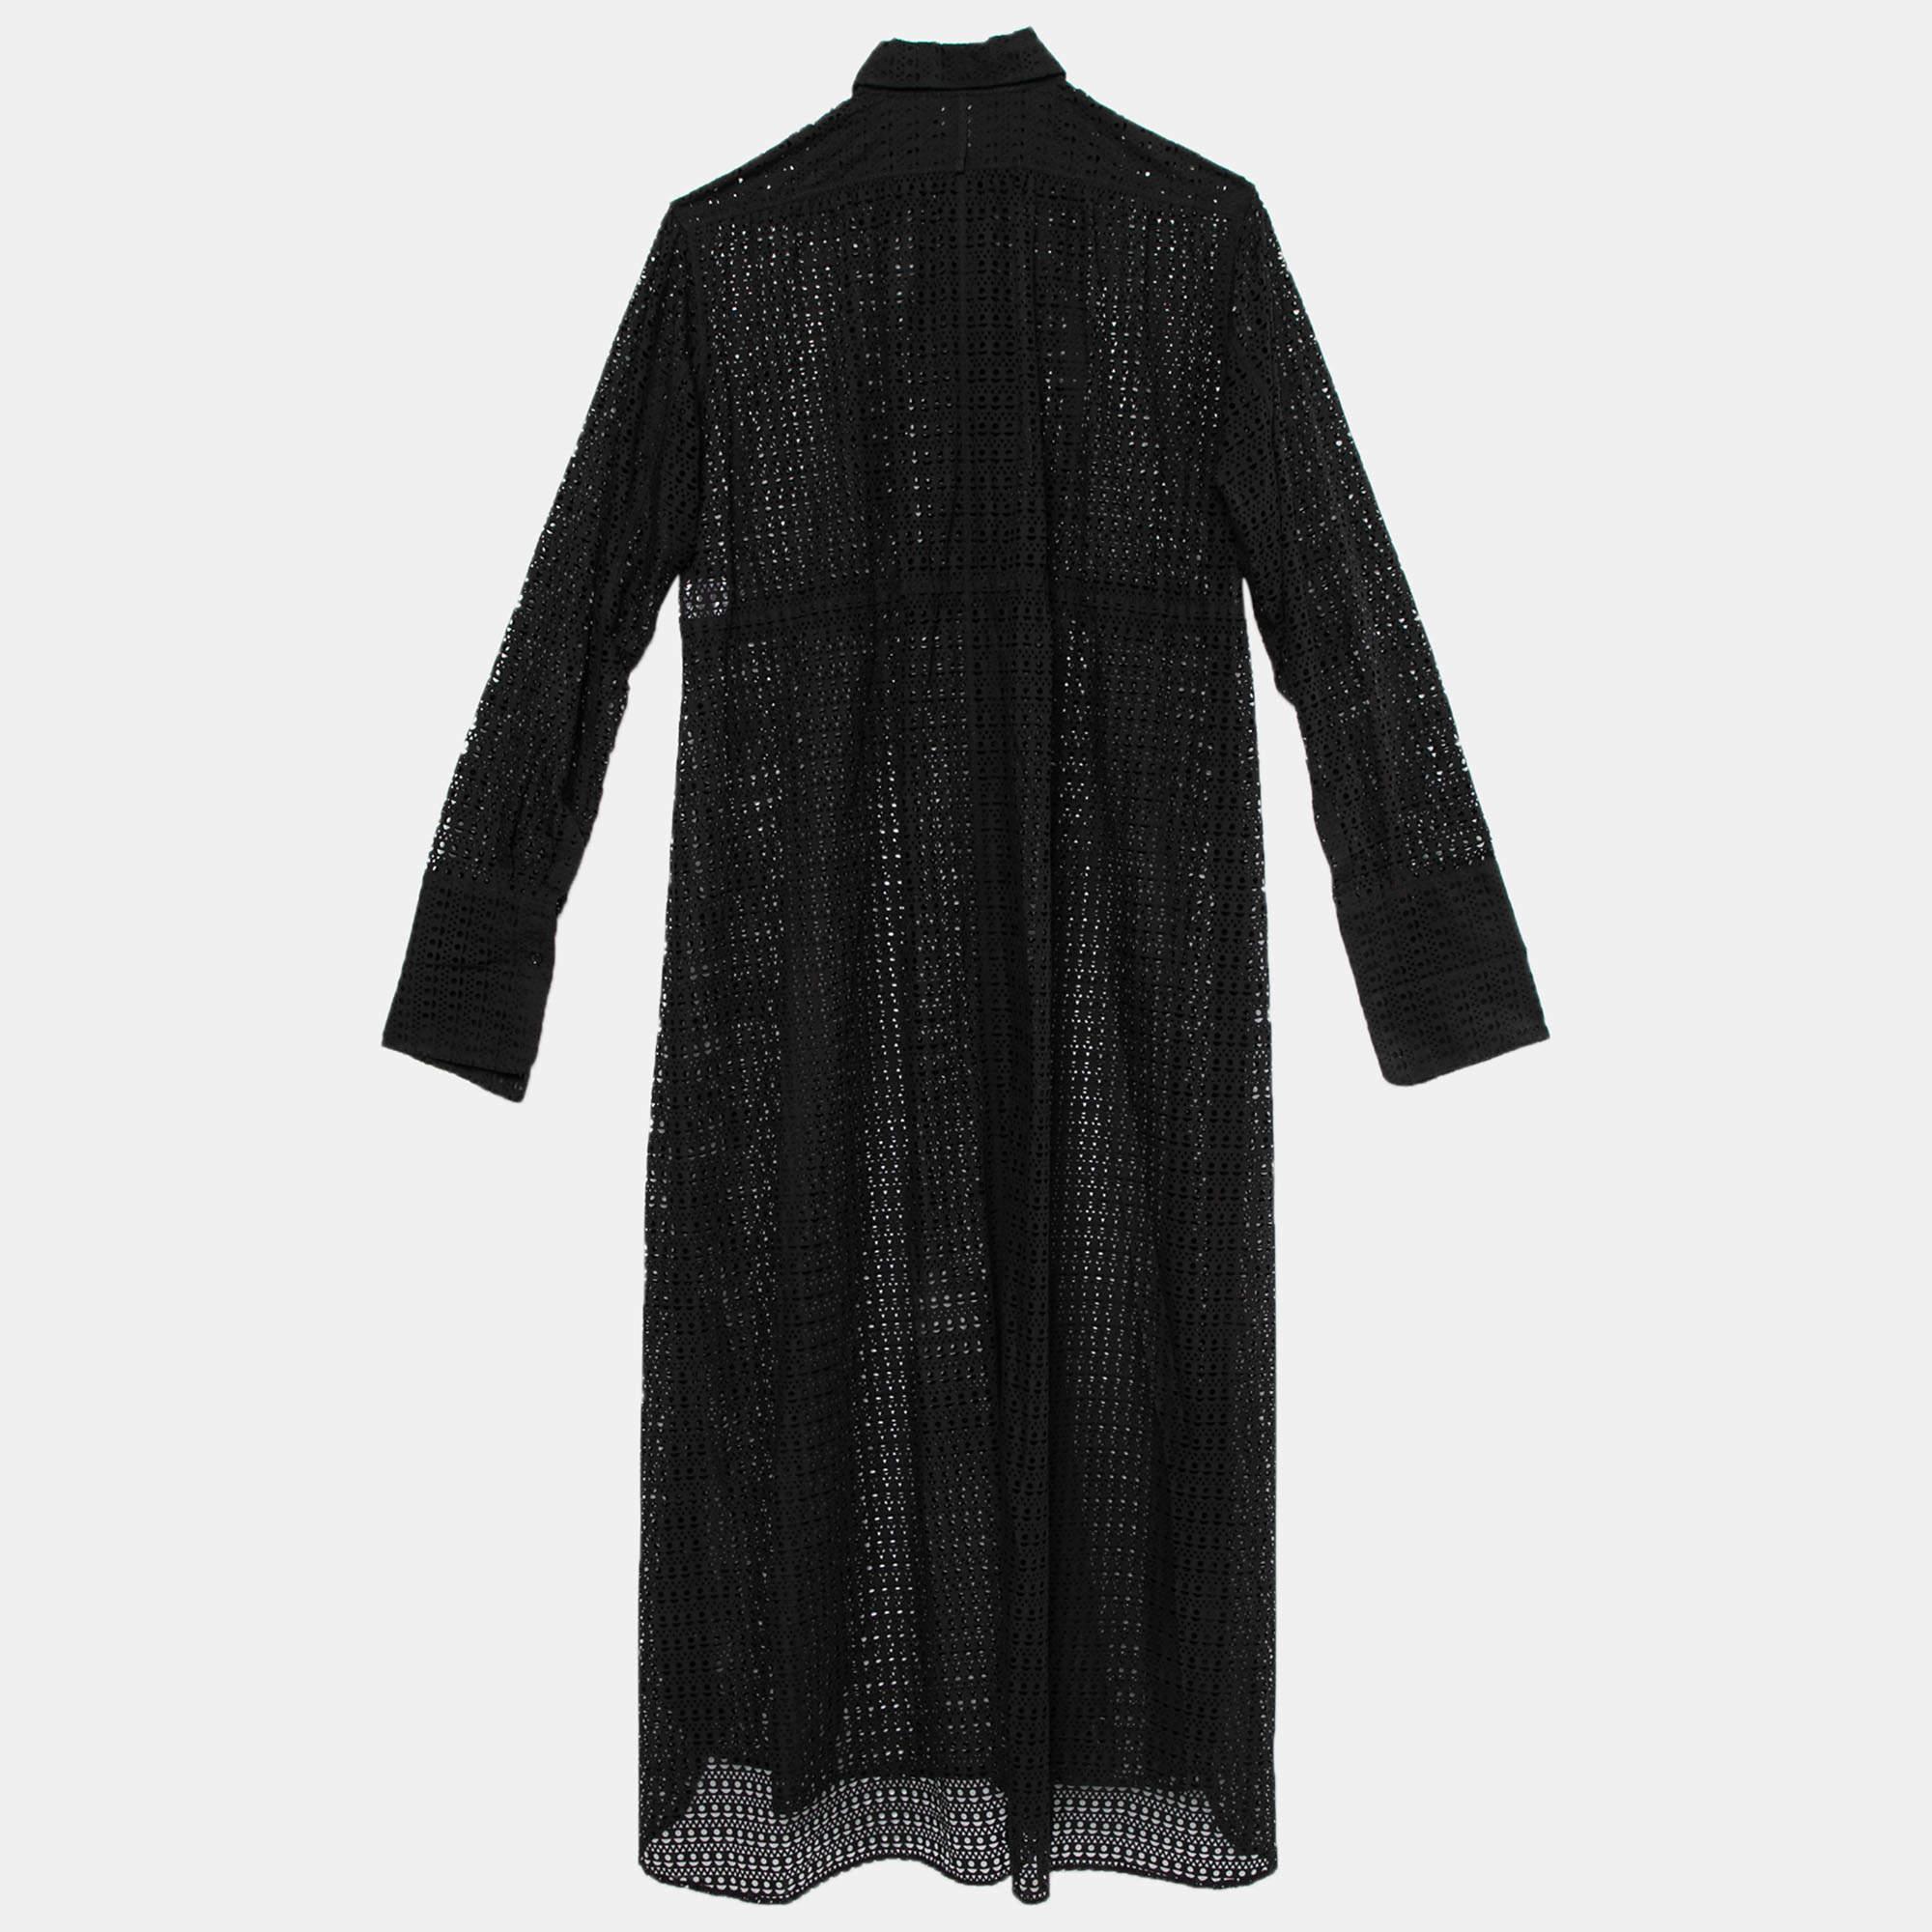 This classy dress from the House of Alaia will help you make an elegant fashion statement. Tailored using black patterned cotton fabric, this dress flaunts laser-cut detailing, collars, and buttoned closures. Add this dress to your collection now.

